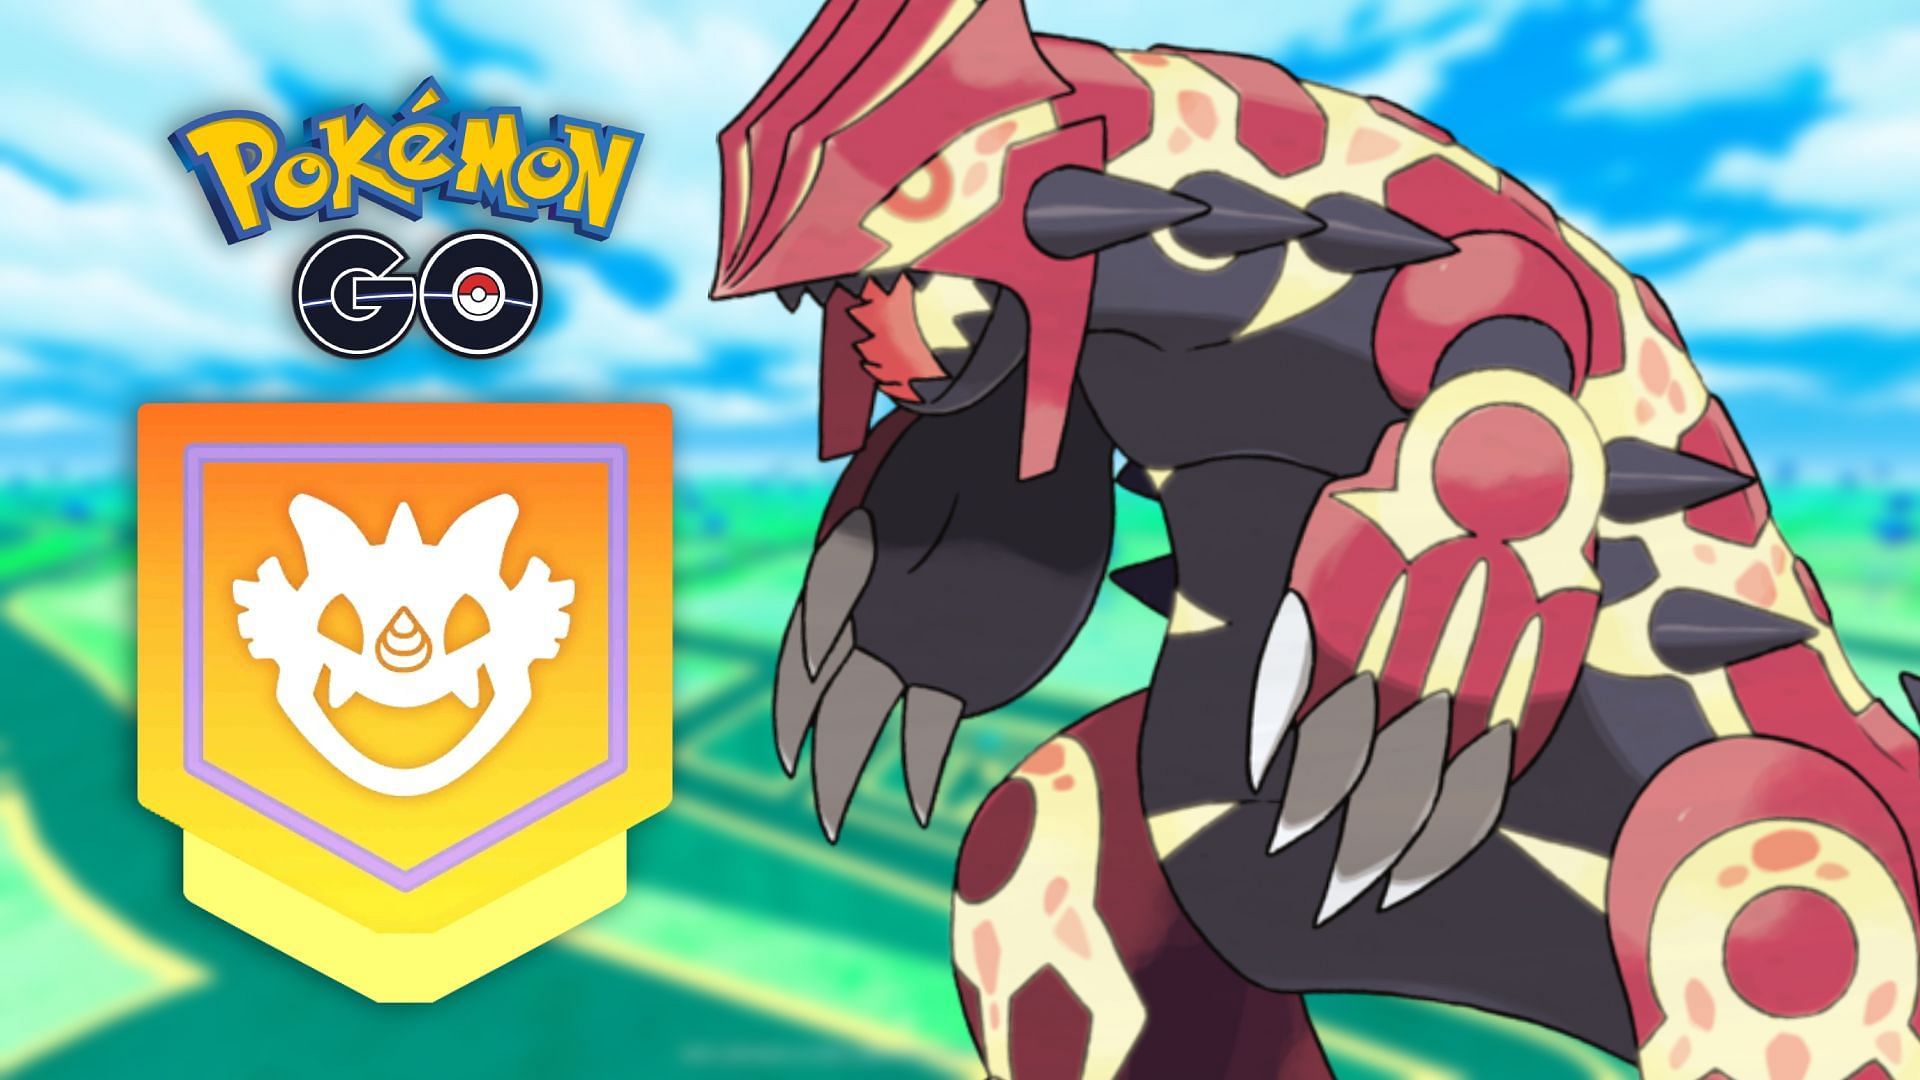 Can you solo defeat Primal Groudon in Pokemon GO